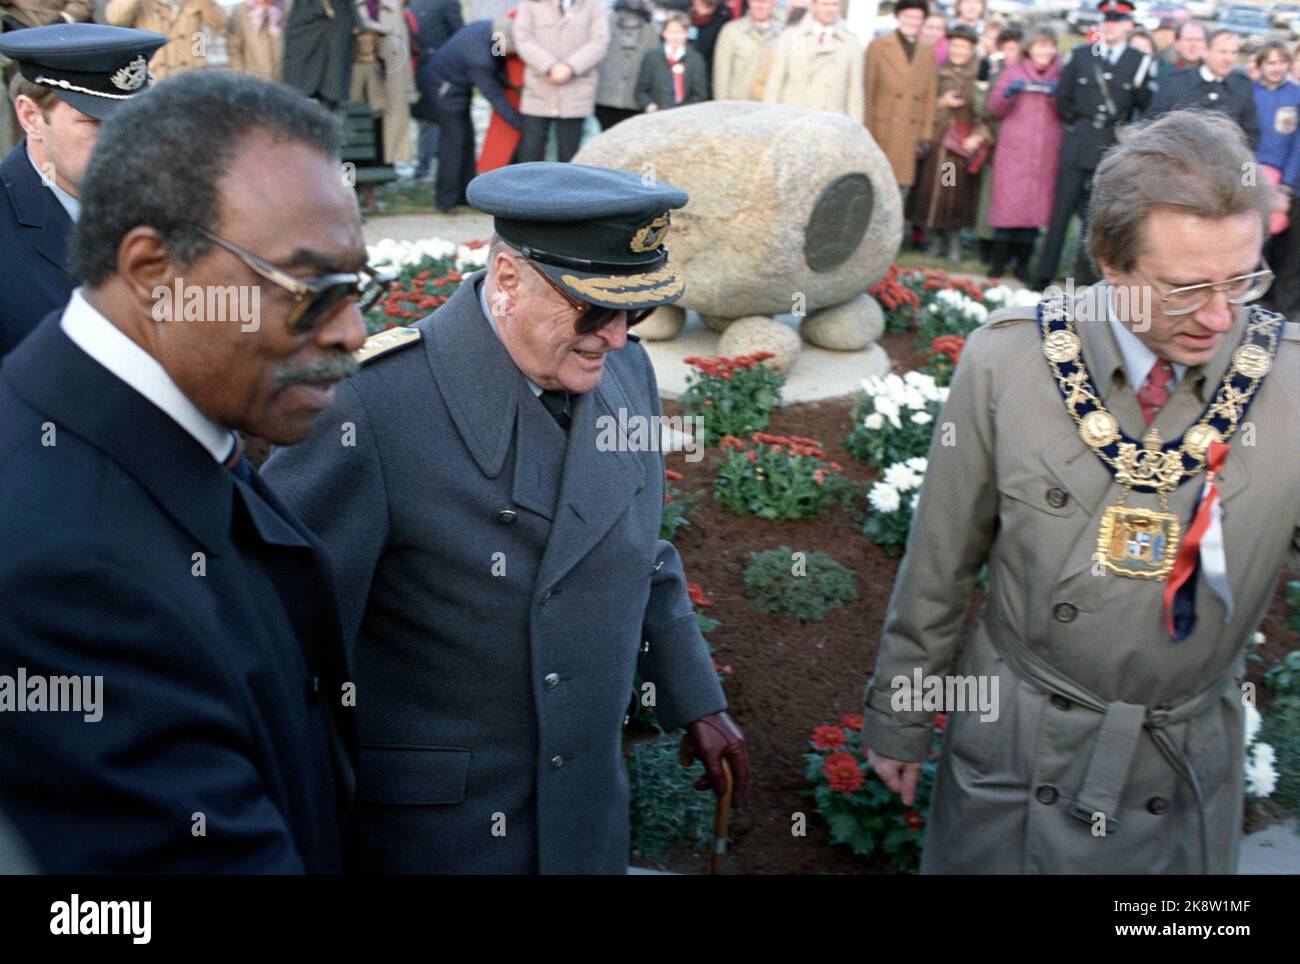 Toronto, Canada 1987-11-20: King Olav visits the United States and Canada in the period 17 to 30 November 1987. The picture: The king during the inauguration ceremony for 'Little Norway Park' in Toronto, Canada November 20, 1987. This place was a training camp for Royal Norwegian Air Force during World War II. In the background memorial for the park. After several years of flaking life, the stone from Norway now has the plaque showing a Norwegian and a Canadian flyer on each side of The globe, got its final location. (Missing other names.) Photo: Jens Kvale Stock Photo